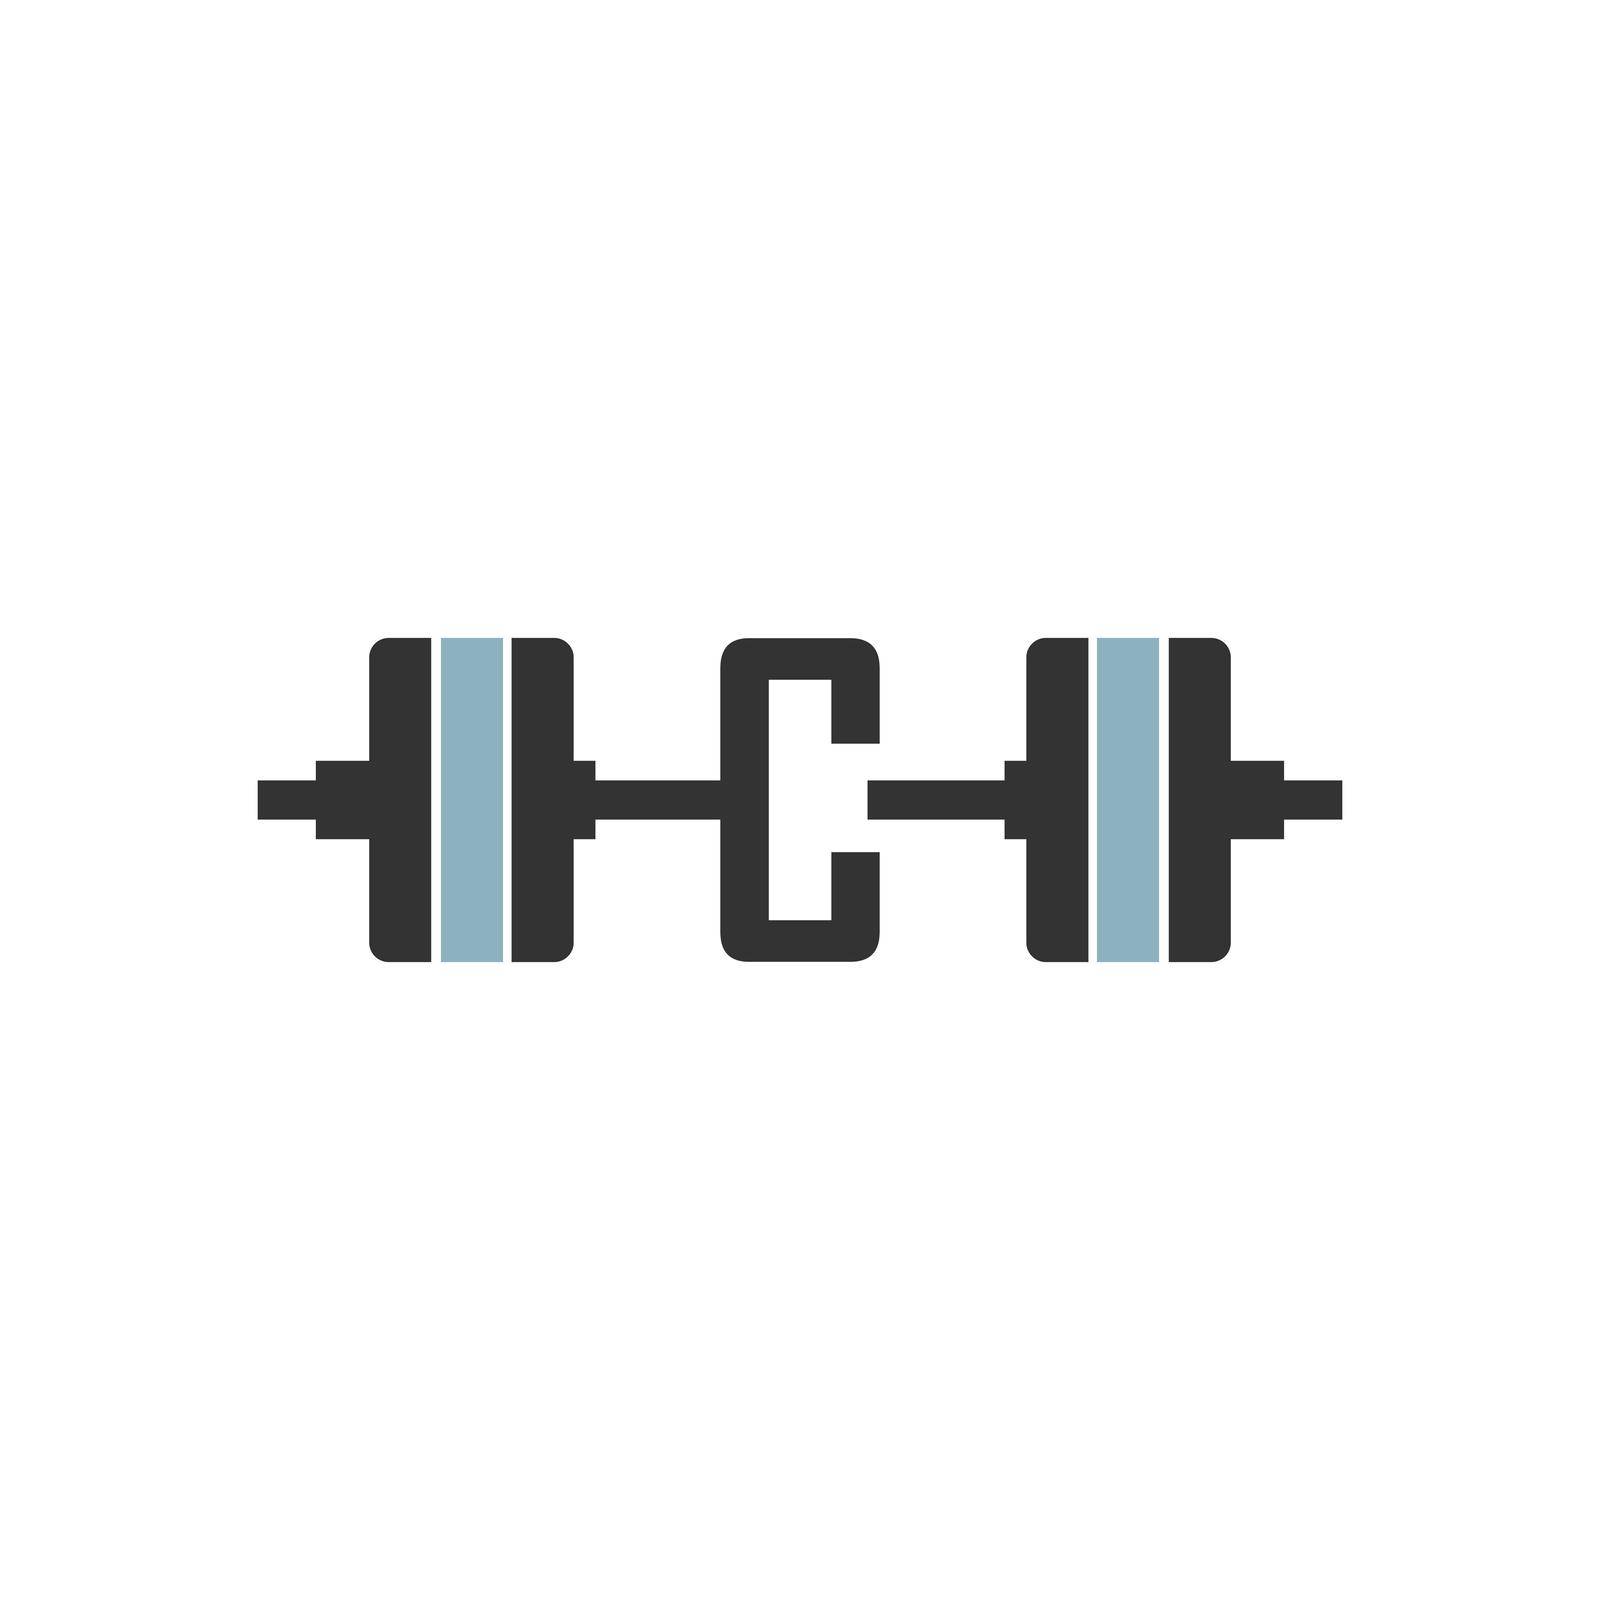 Letter C with barbell icon fitness design template by bellaxbudhong3